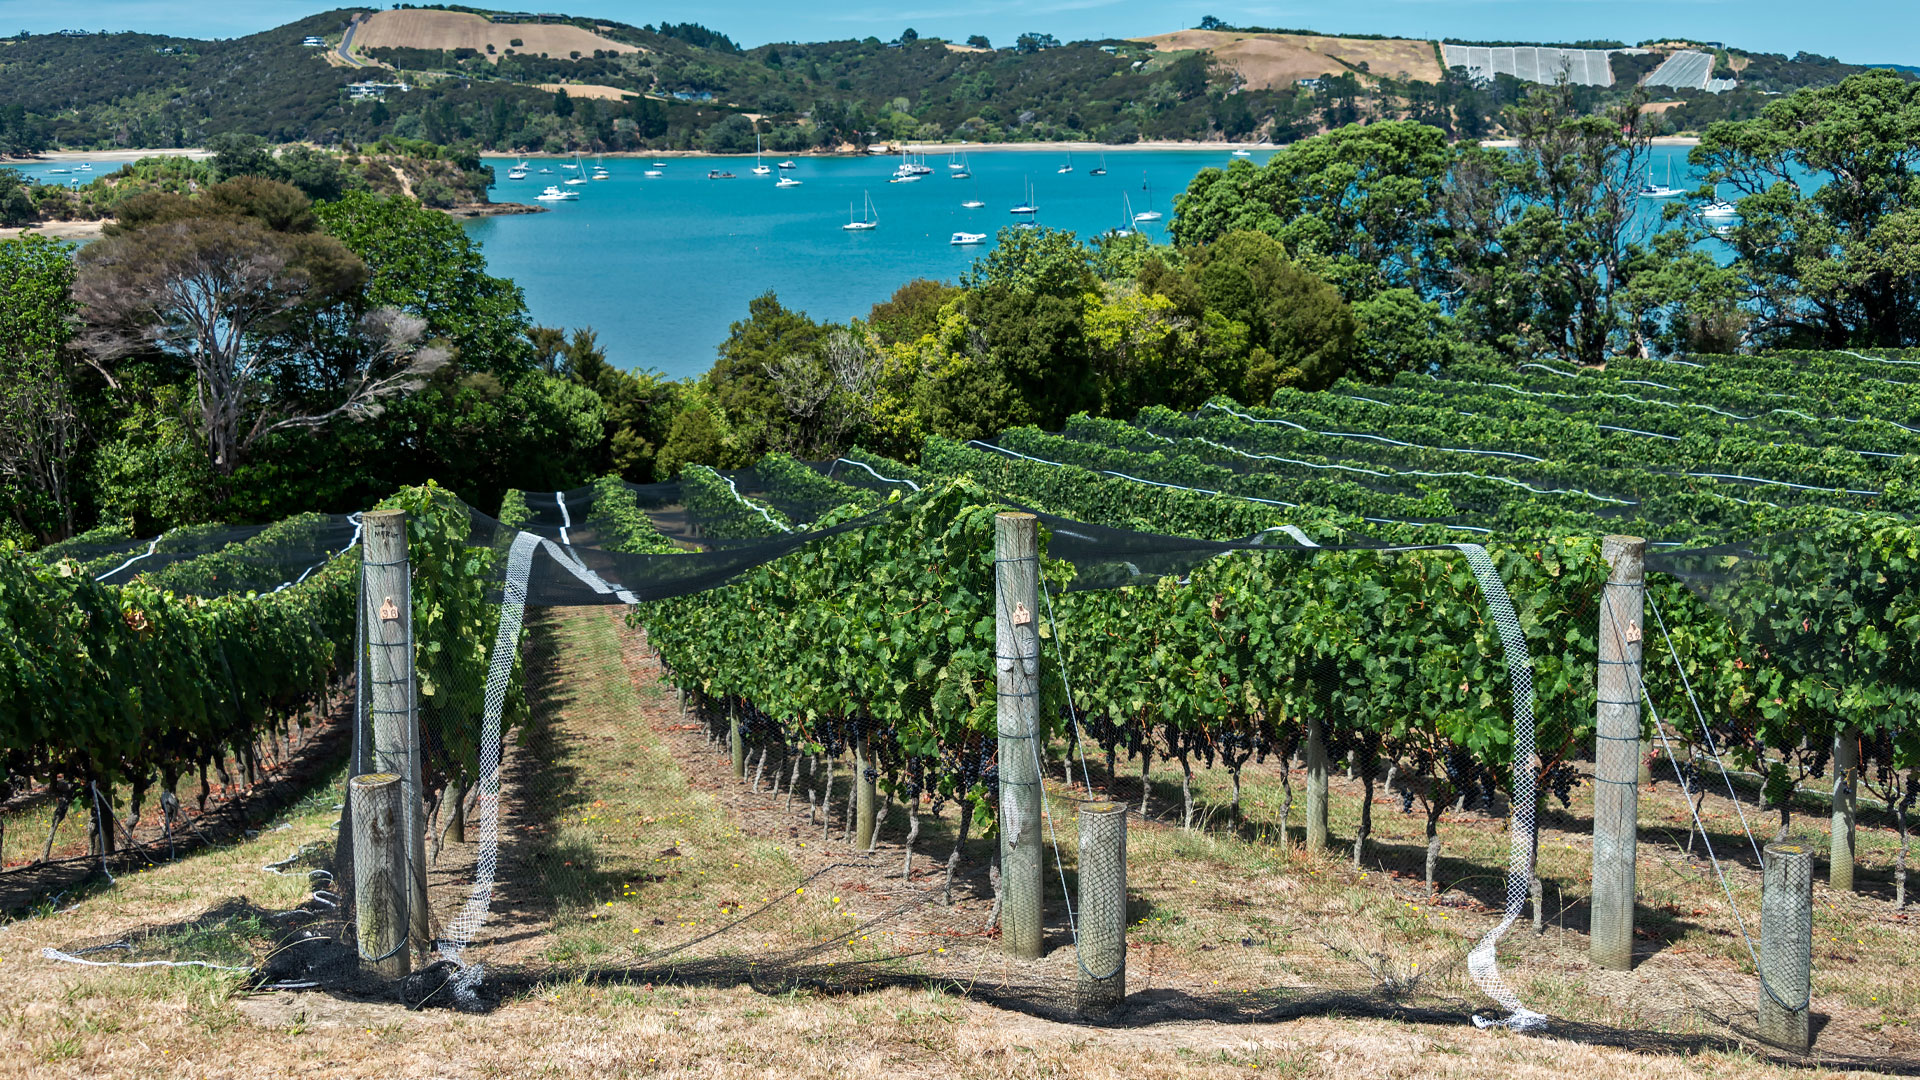 An image of one of Waiheke Island's vineyards, showing the ocean in the background.